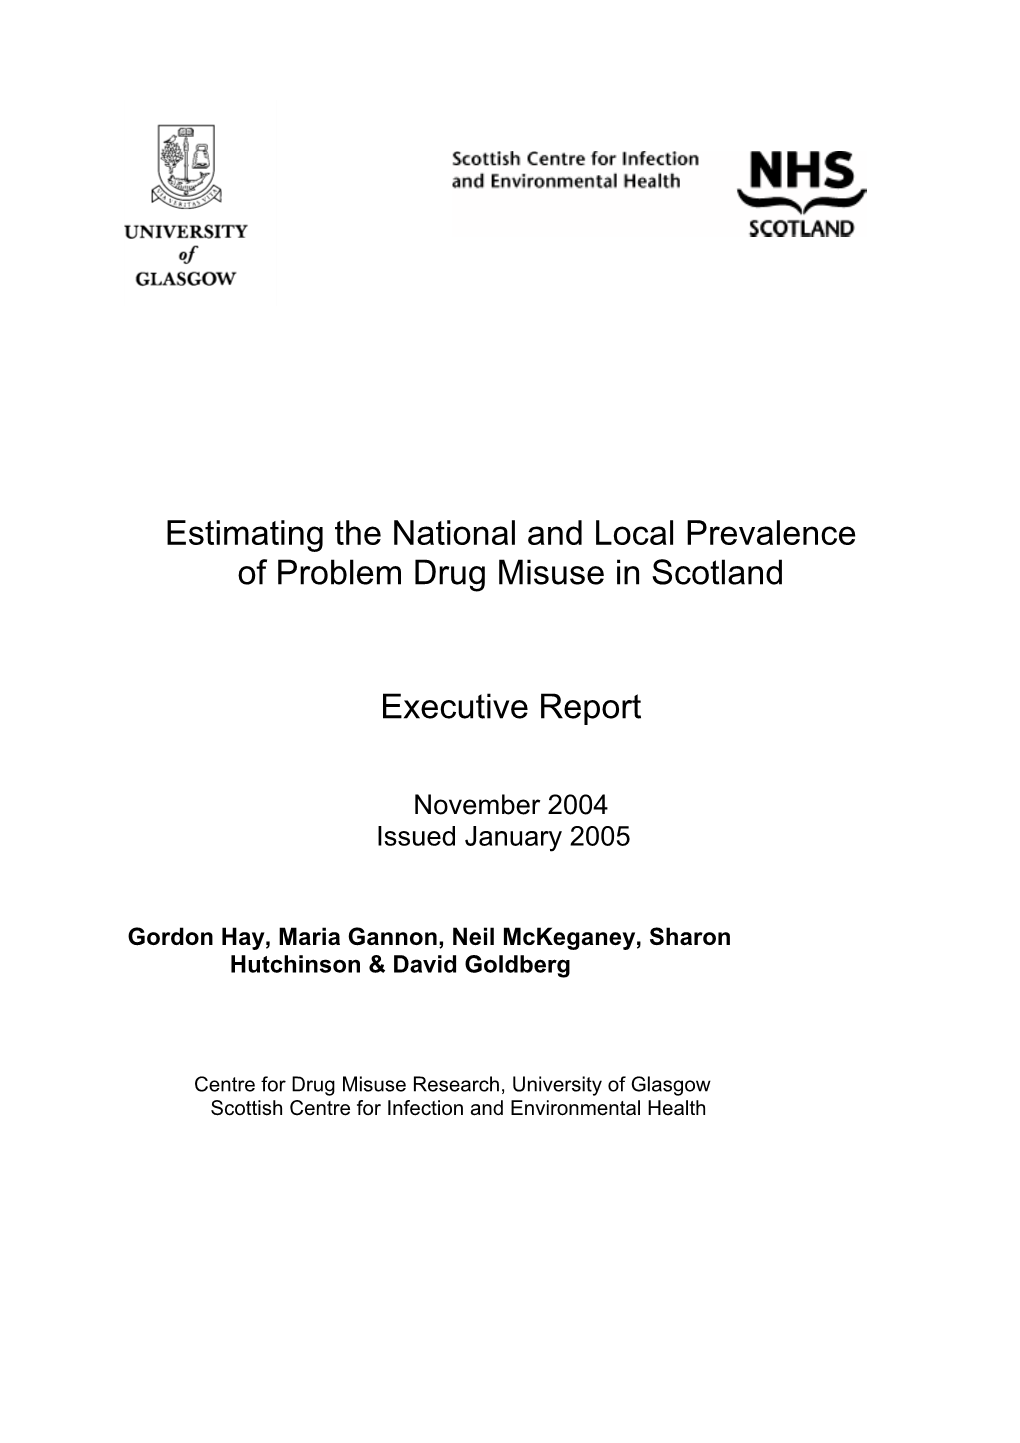 Estimating the National and Local Prevalence of Problem Drug Misuse in Scotland